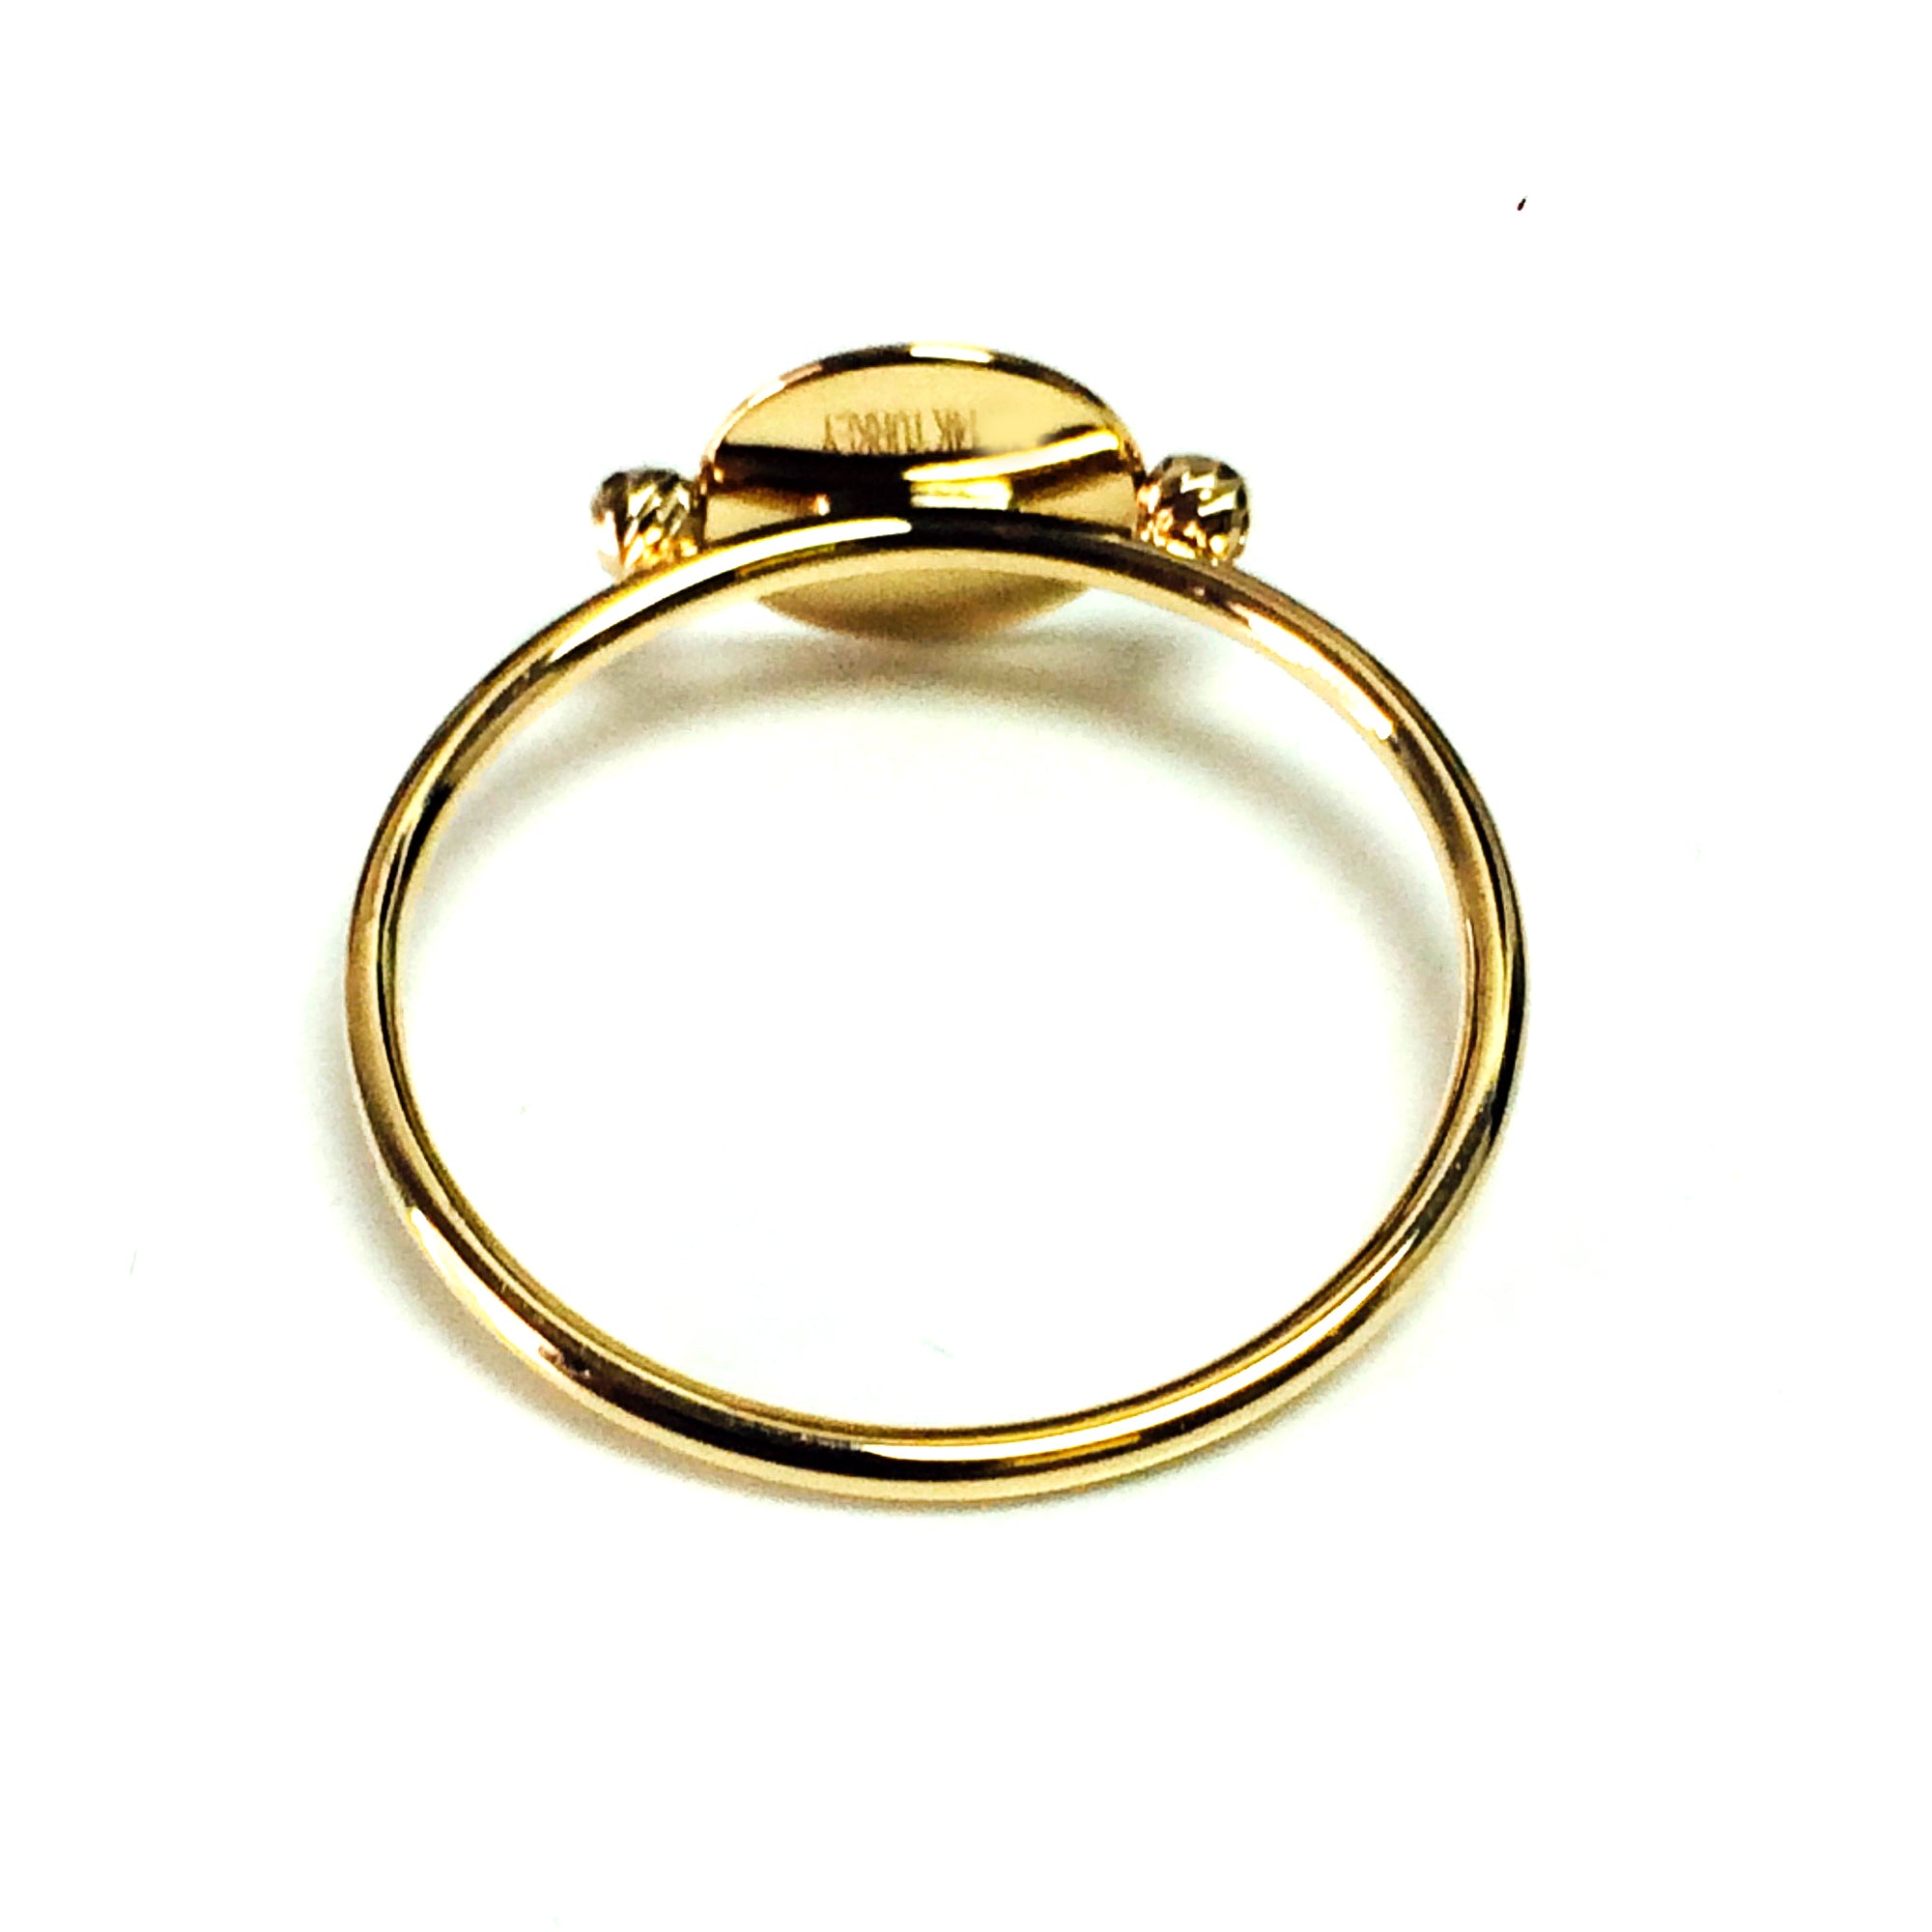 14K Yellow Gold Disc With Diamond Cut Beads Ring, Size 7 fine designer jewelry for men and women